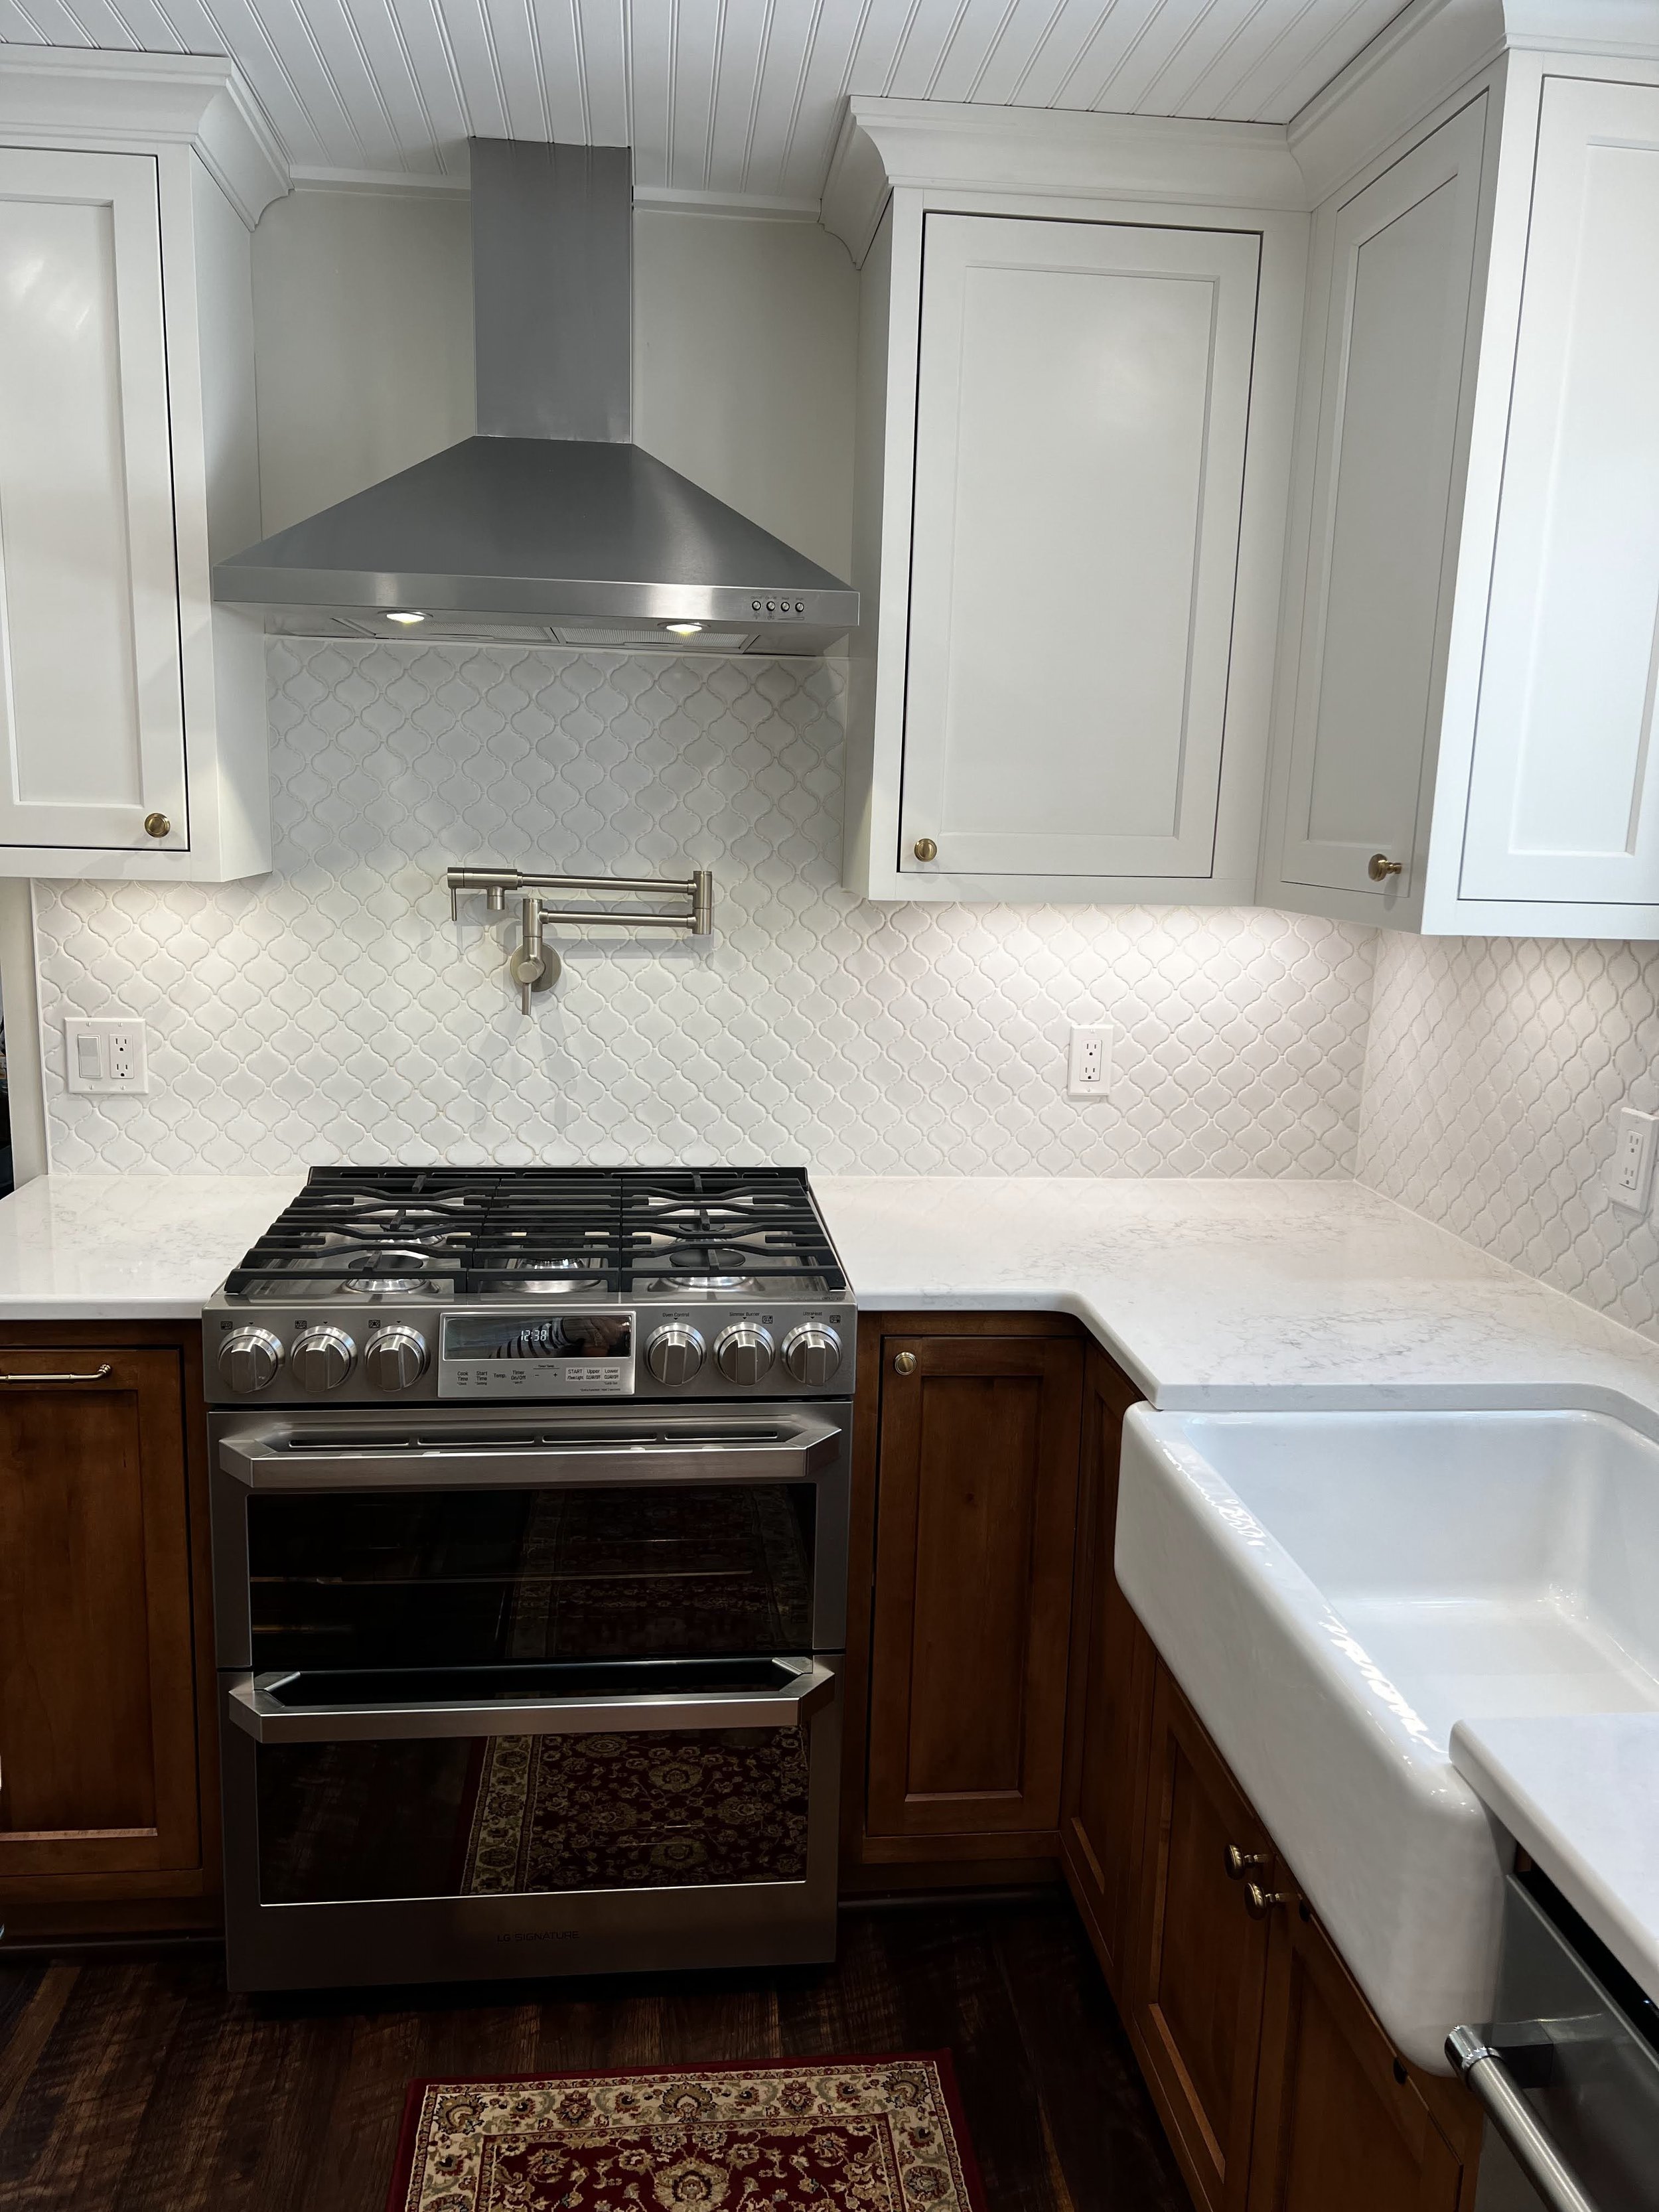 Shaw Remodeling - kitchen design renovations in Niantic East Lyme Old Lyme CT before and after photos makeover (6).jpg